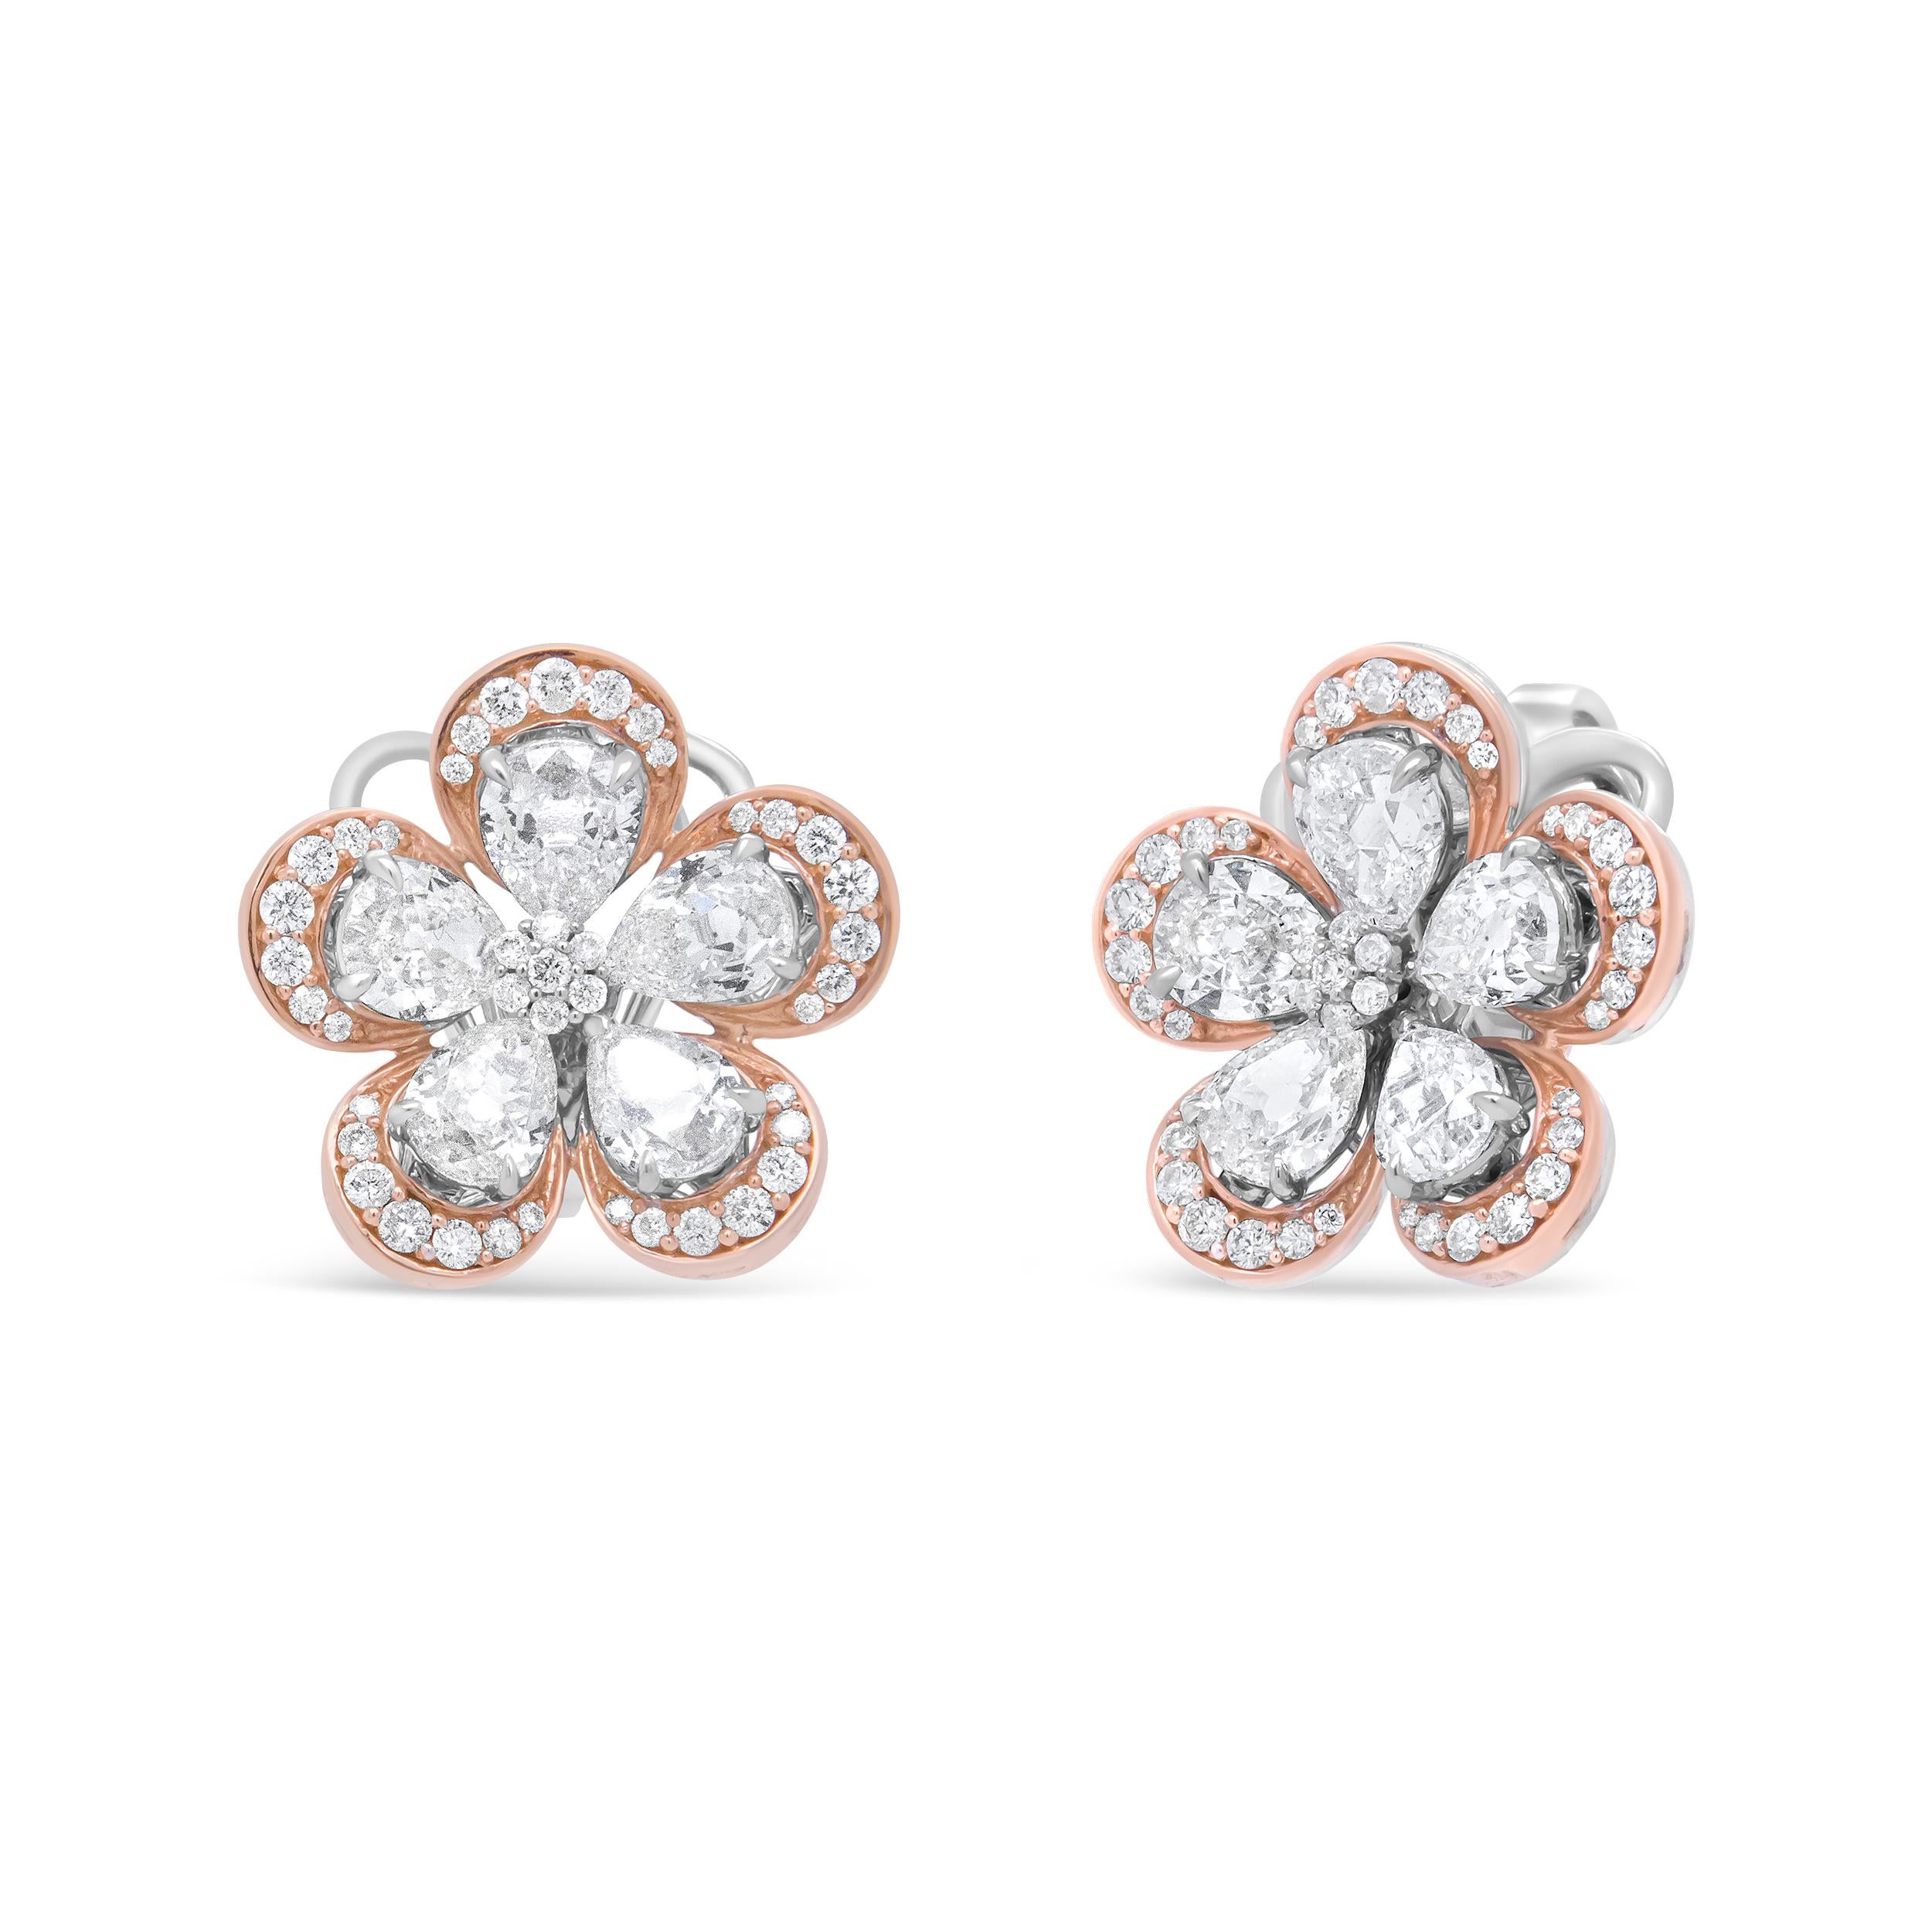 Depicting the elegance of a flower in bloom , this sophisticated pair of diamond studs radiated femininity and grace with a total 6.00 Cttw with an approximate G-H Color and VS2-SI1 Clarity. Five pear-cut diamonds serve as the petals of the blossom,